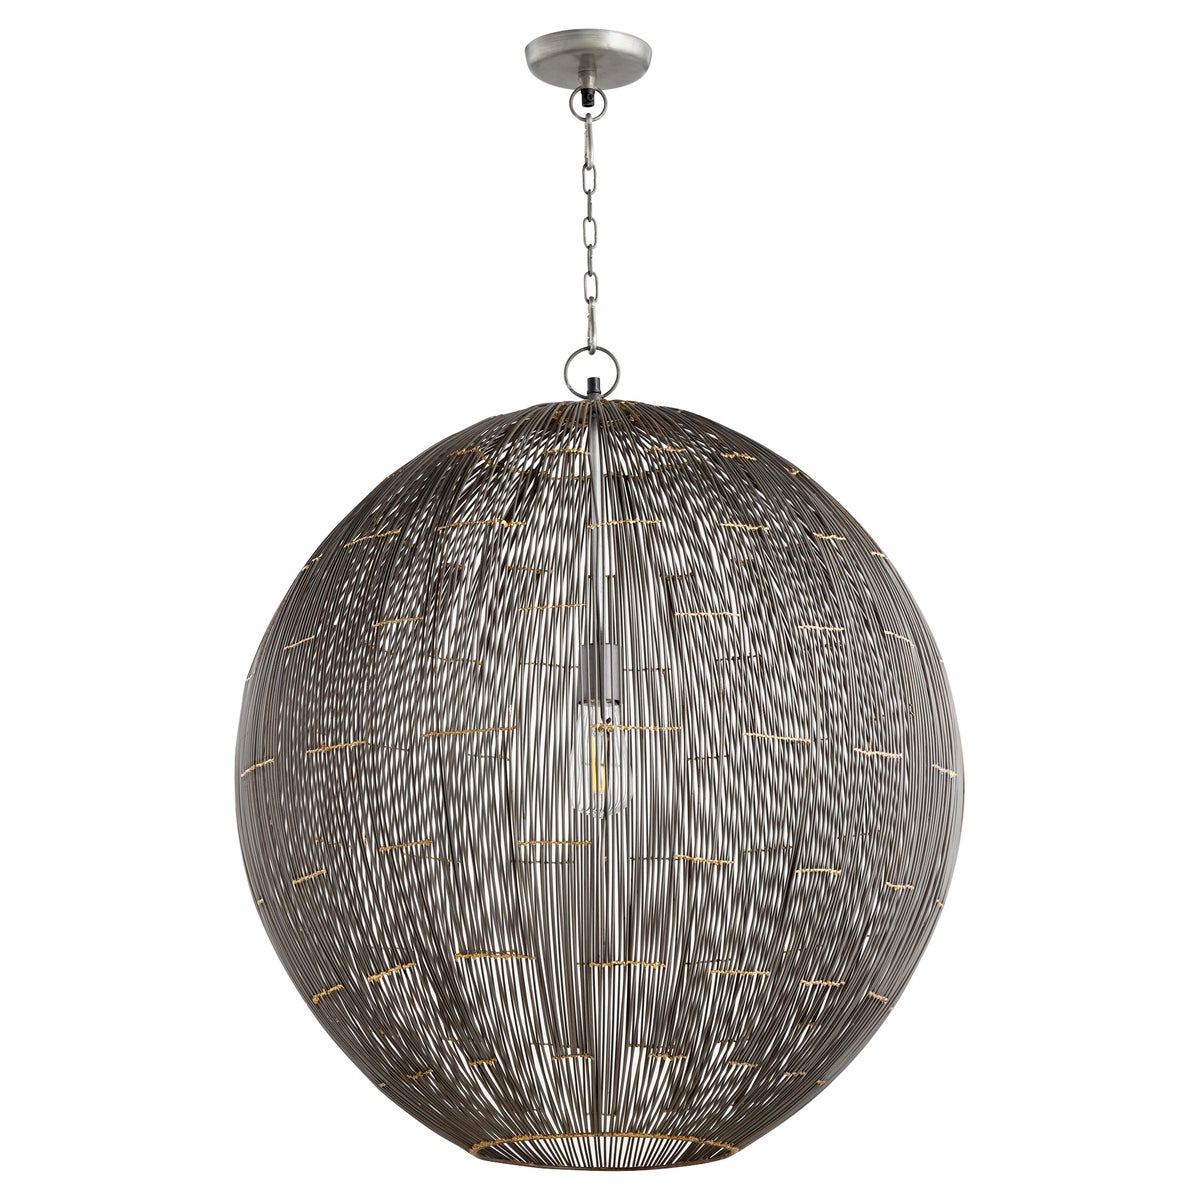 Wire Sphere Pendant Light hanging from a chain, featuring a round metal chandelier with a single light source. Open-form design casts a beautiful glow, allowing light to flow freely. Artful and elegant addition to any space.